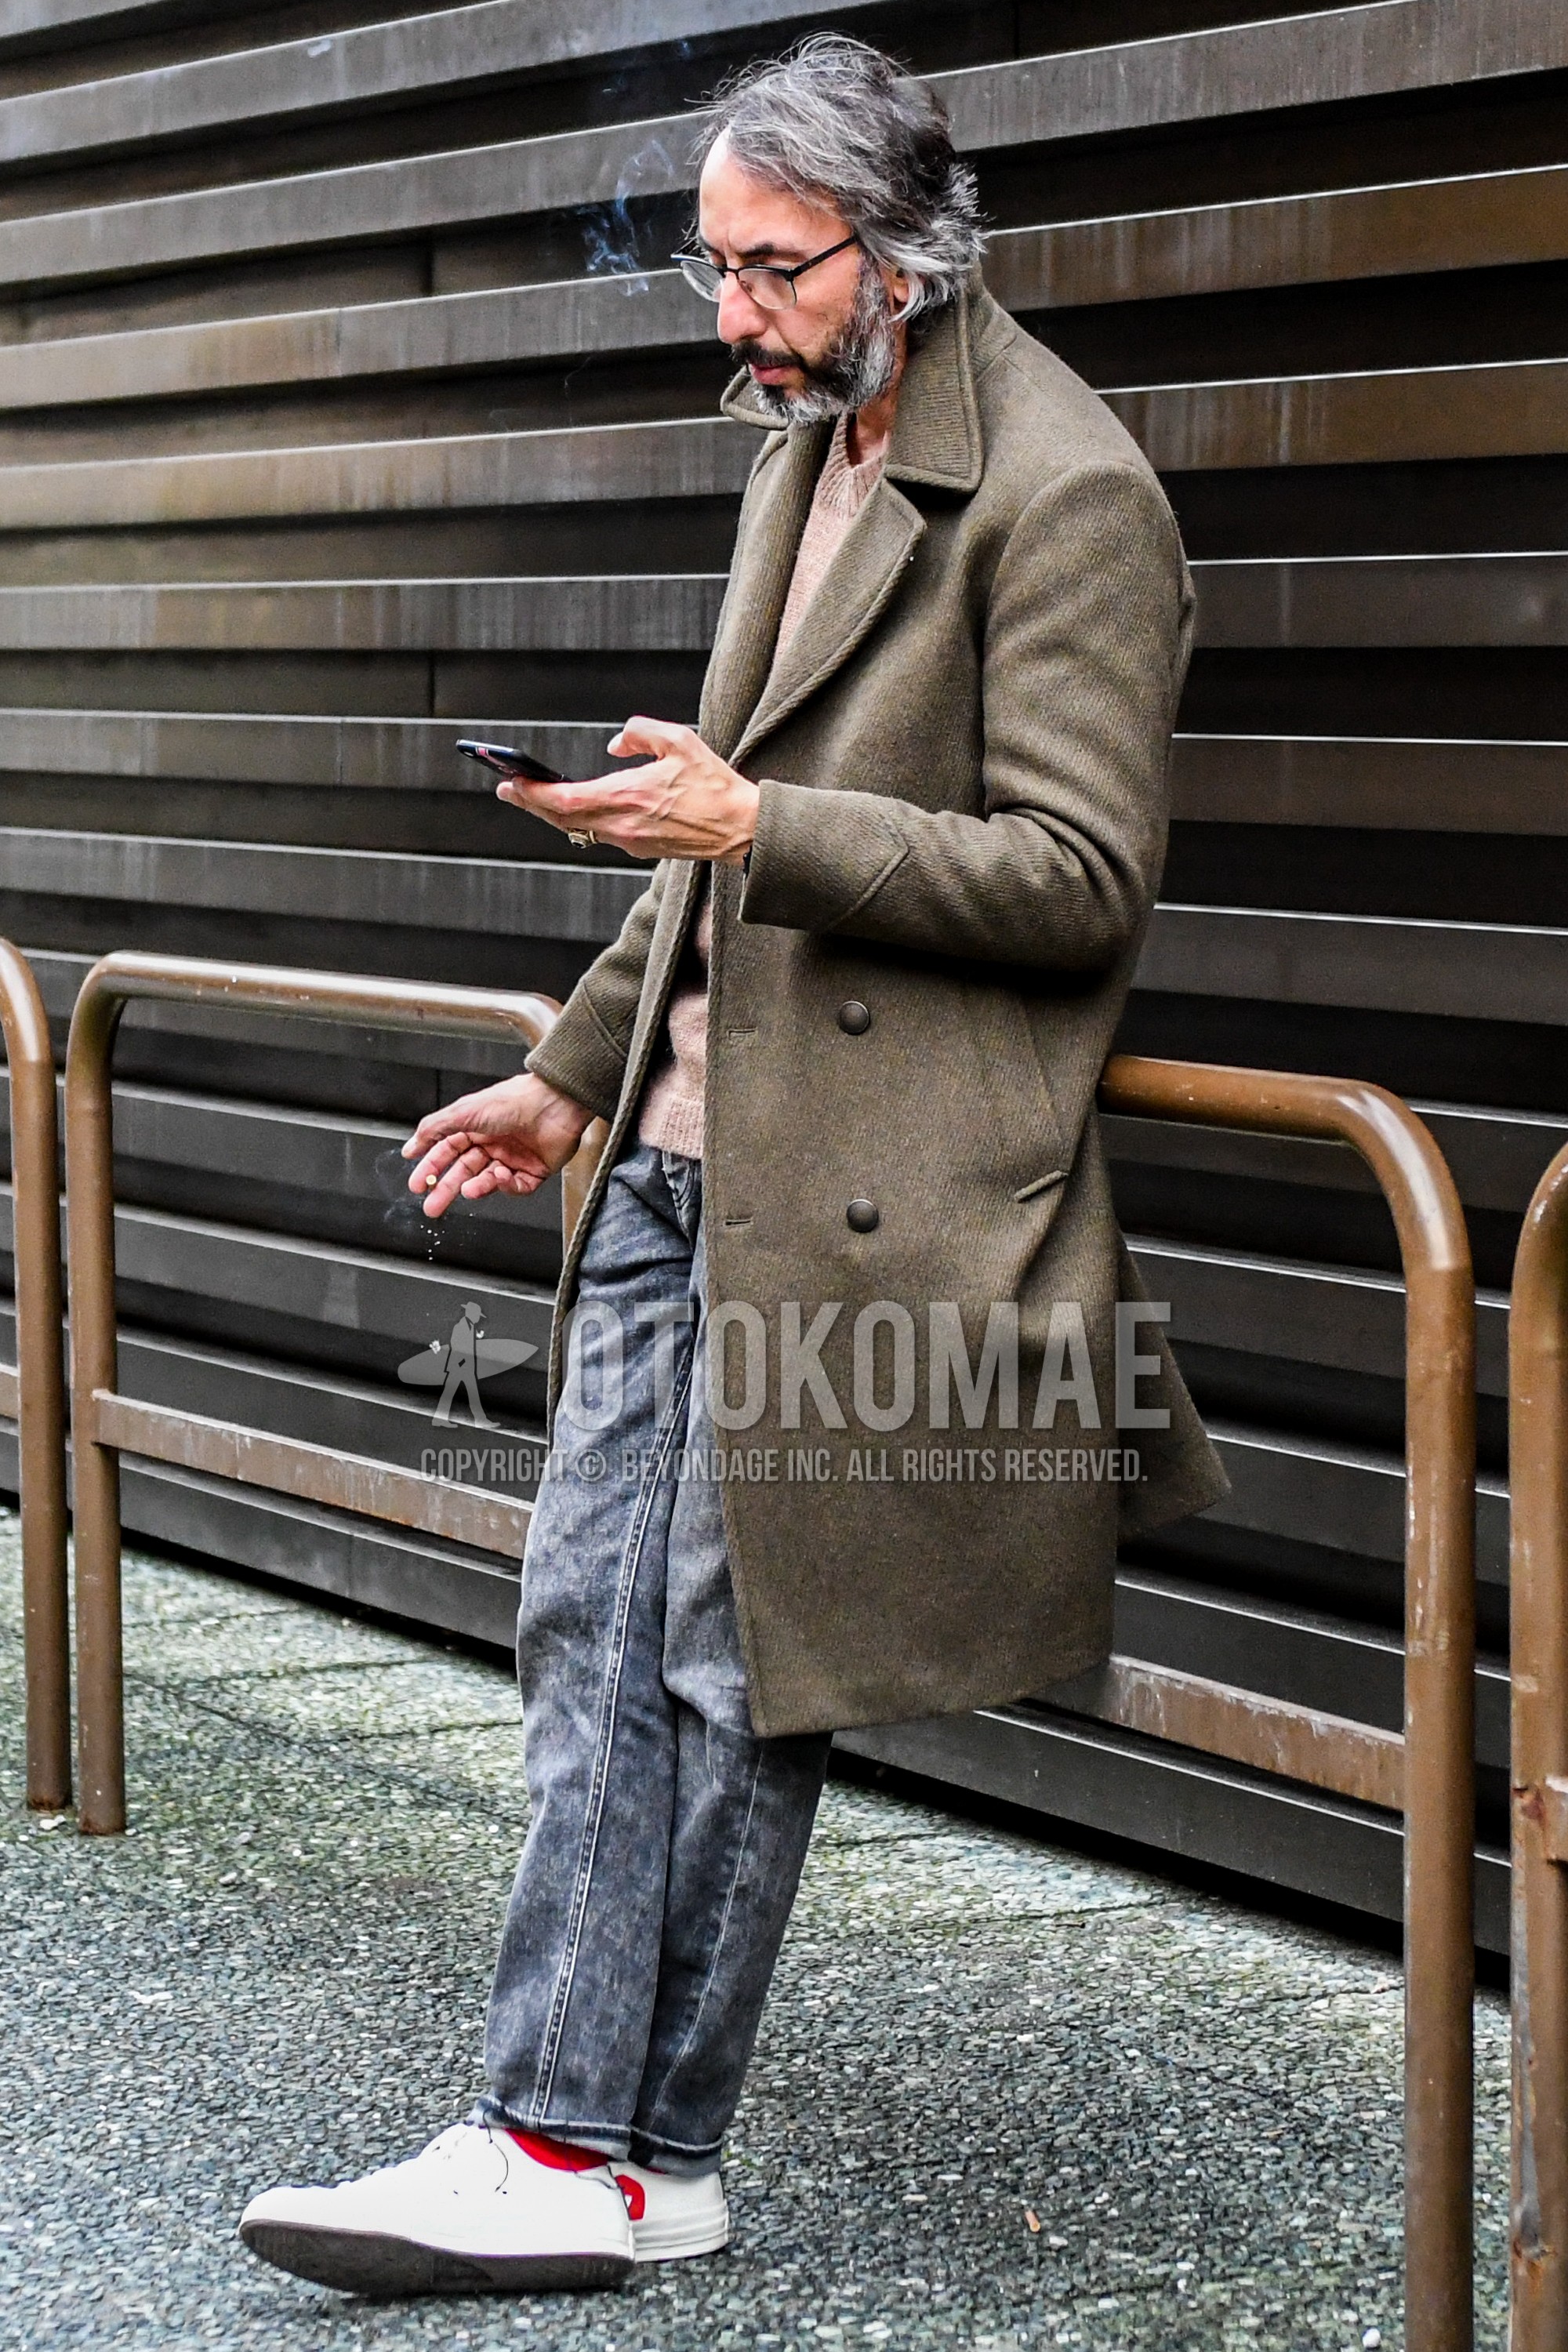 Men's winter outfit with brown plain ulster coat, beige plain sweater, gray plain denim/jeans, red plain socks, white low-cut sneakers.